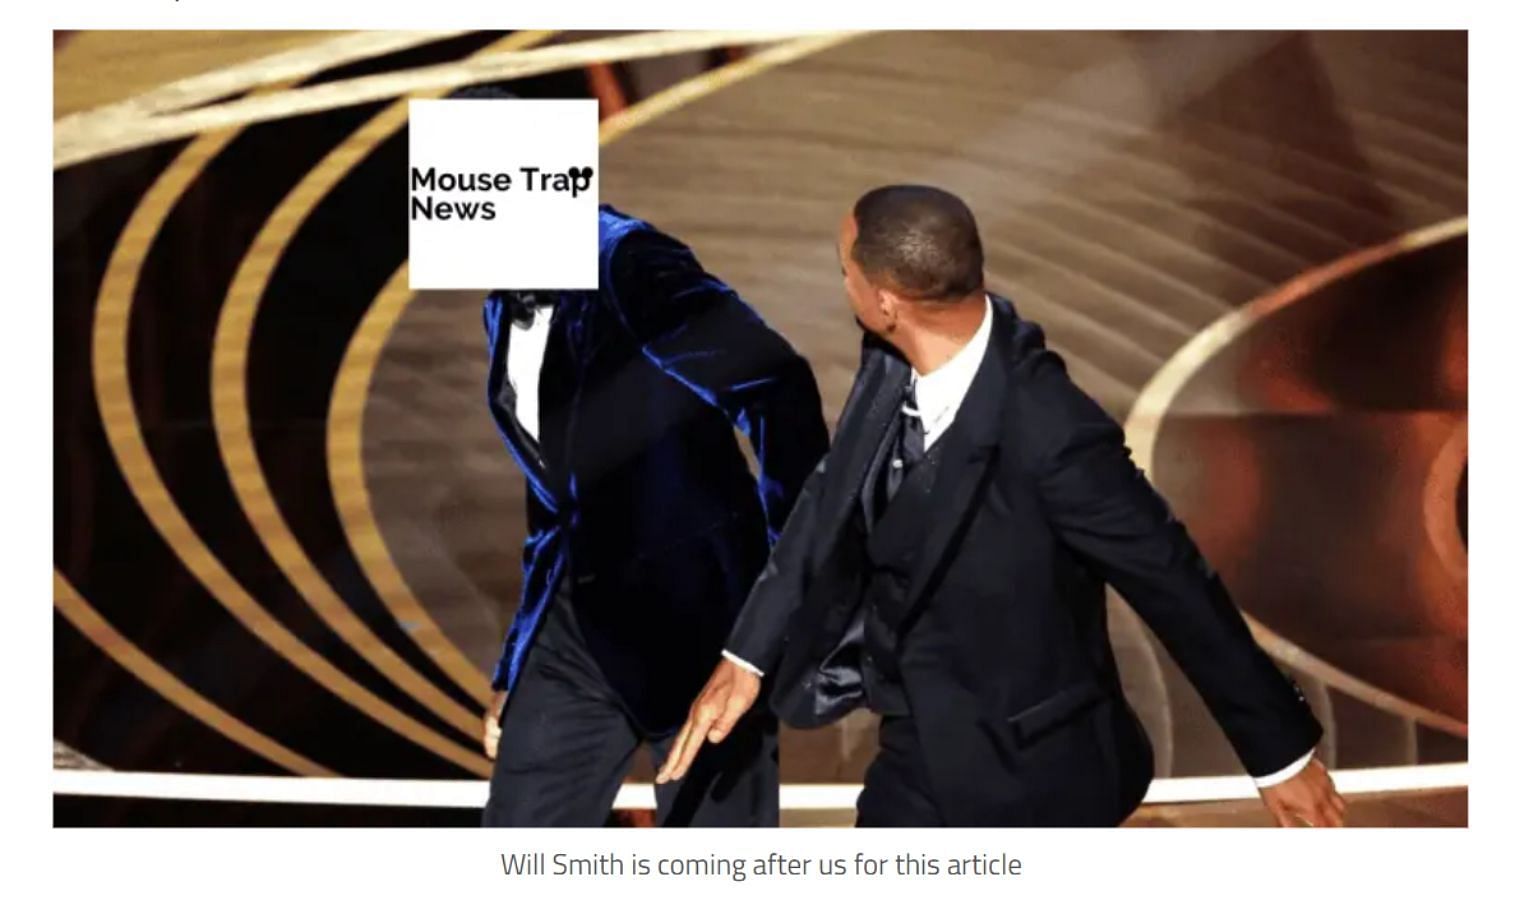 Will Smith&#039;s infamous slap was made into a meme by Mouse Trap News (Image via Mouse Trap News)